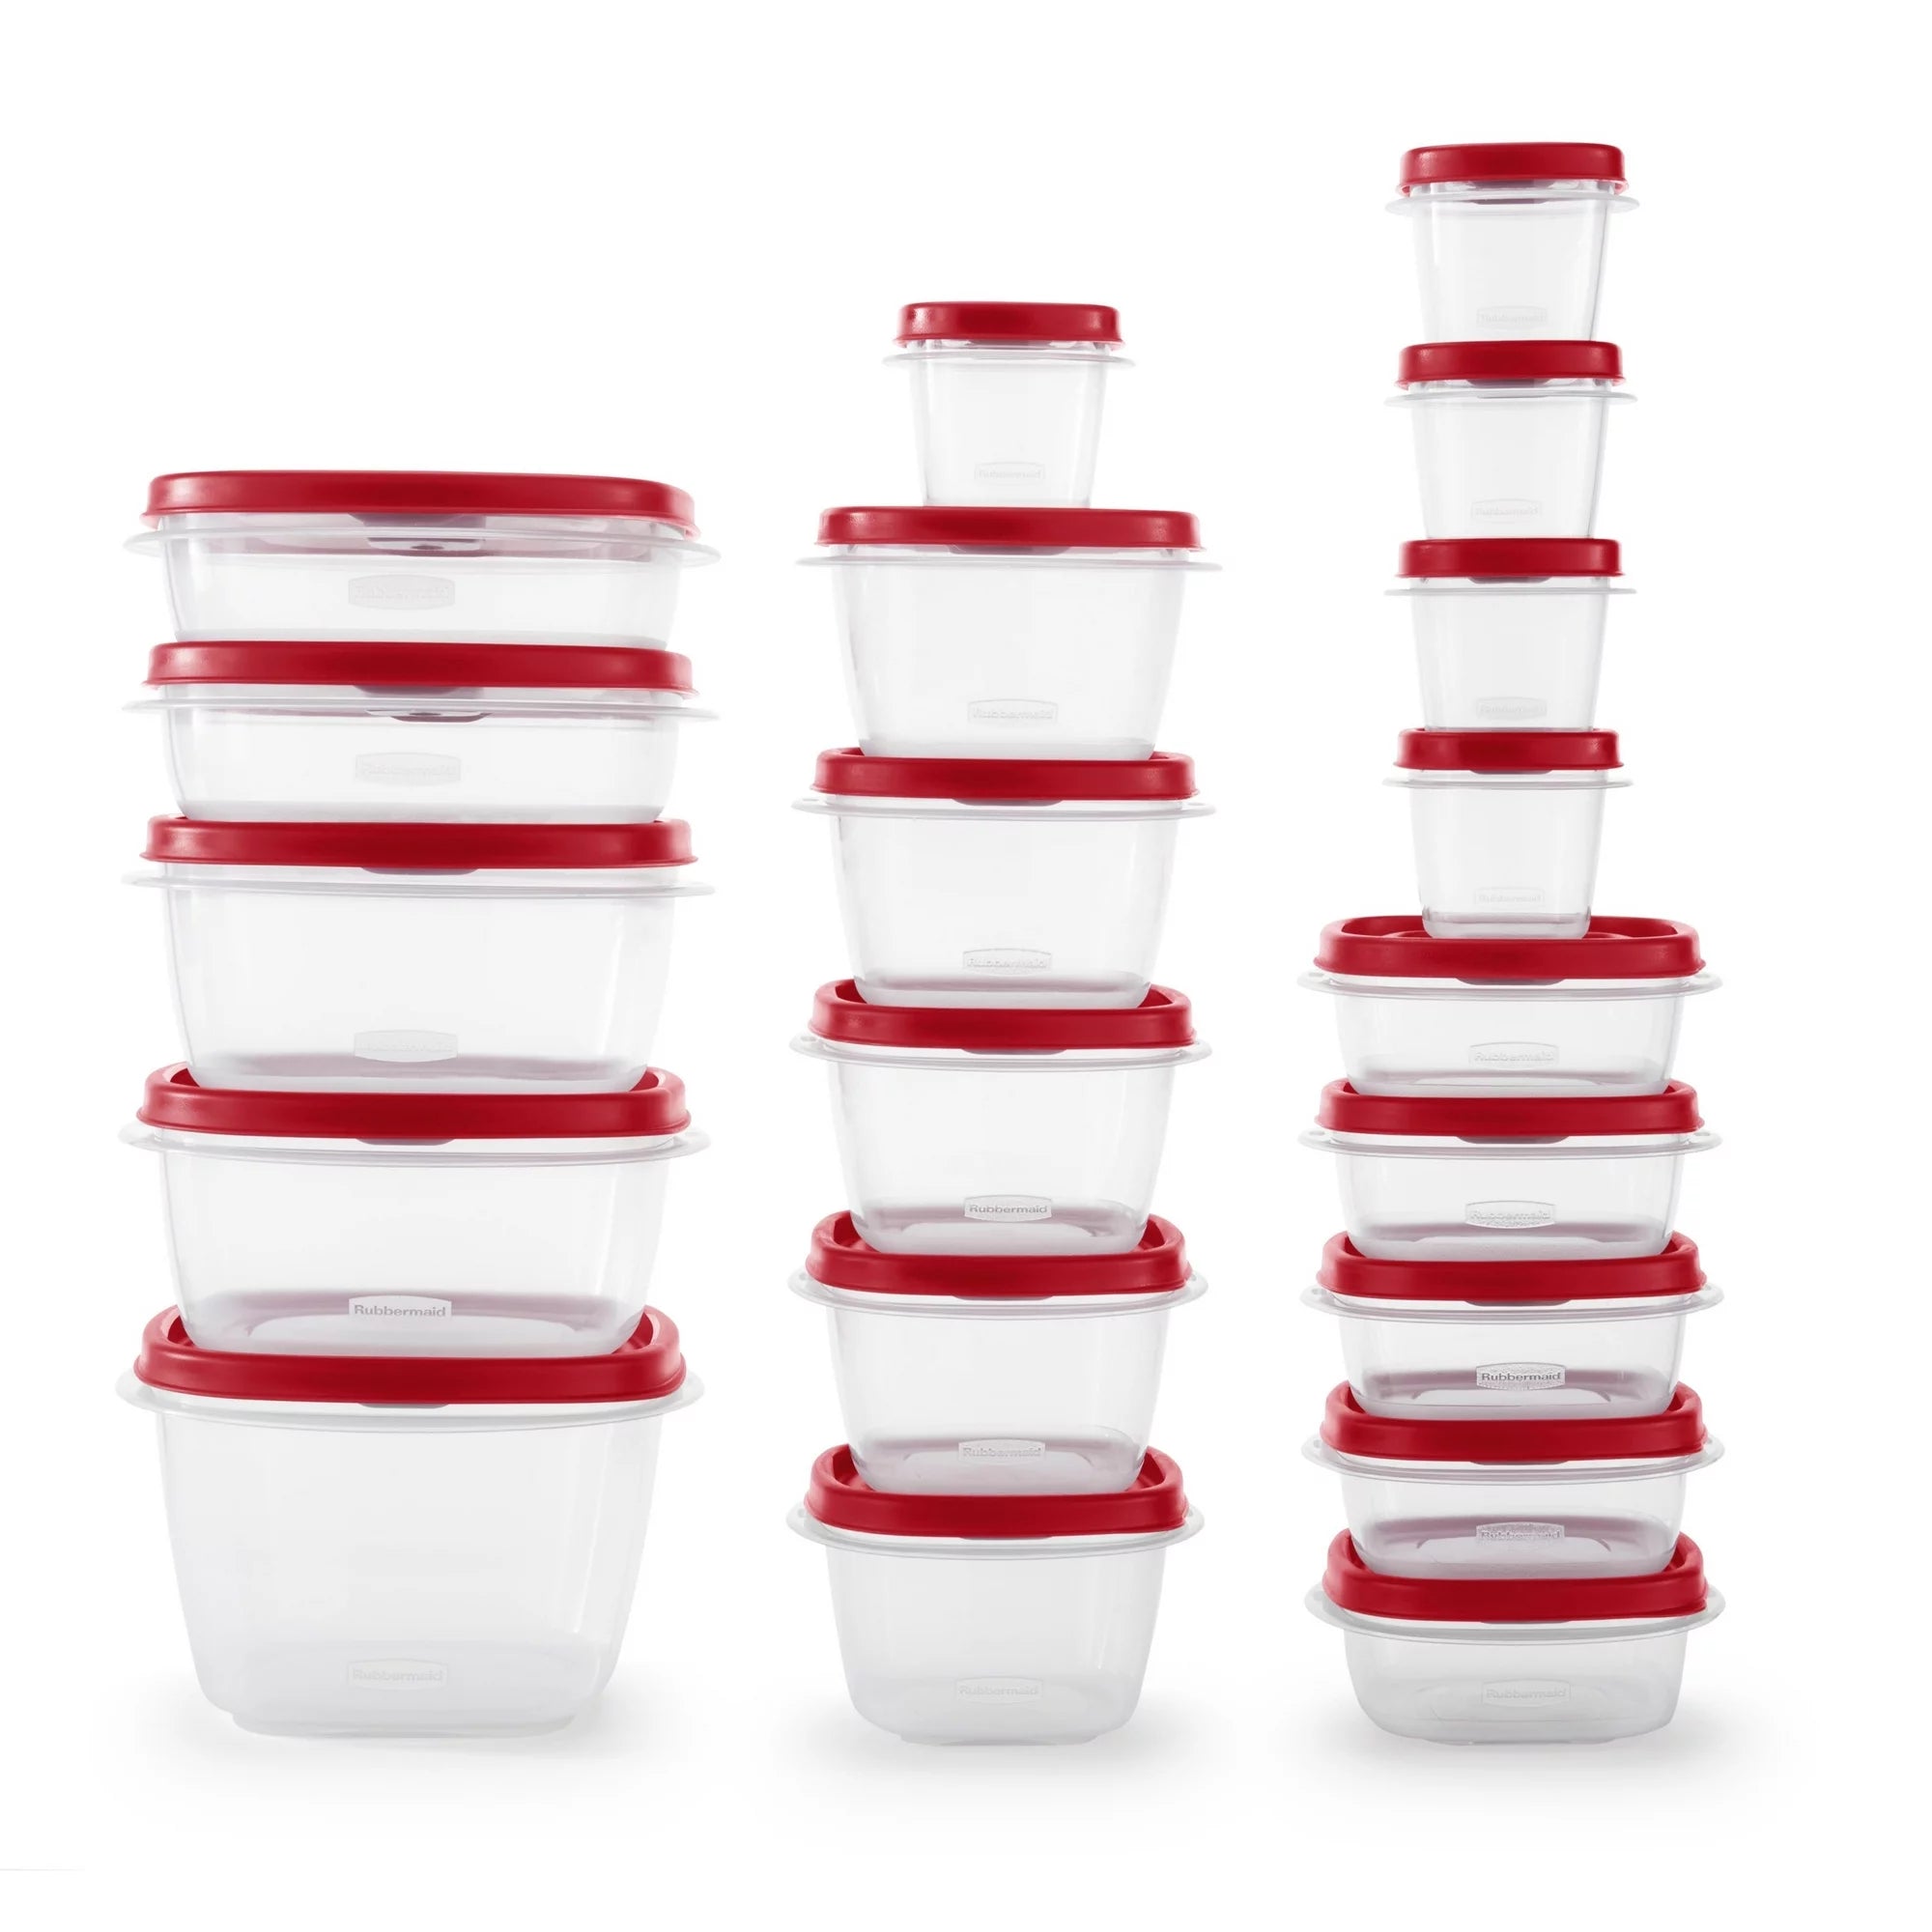 Rubbermaid Easy Find Lids 3-Cup Food Storage Containers with Red Vented Lids  (Pack of 3 containers) 